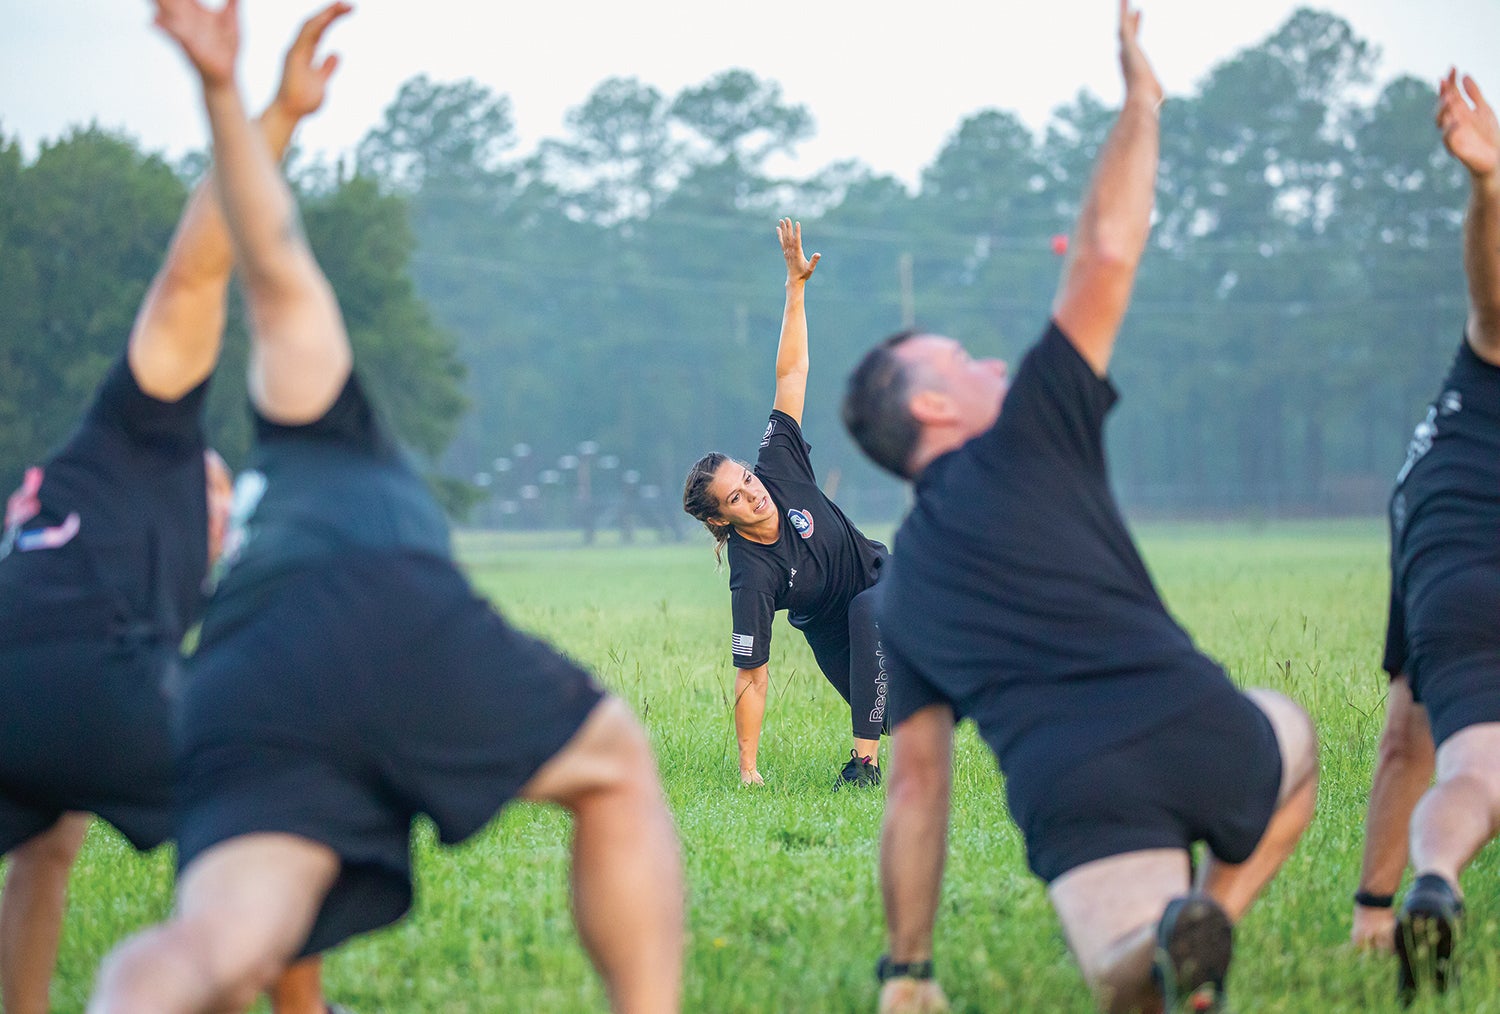 Warrant officers stationed at Fort Liberty, North Carolina, formerly known as Fort Bragg, take part in physical training led by Holistic Health and Fitness trainers. (Credit: U.S. Army/Sgt. Jacob Moir)